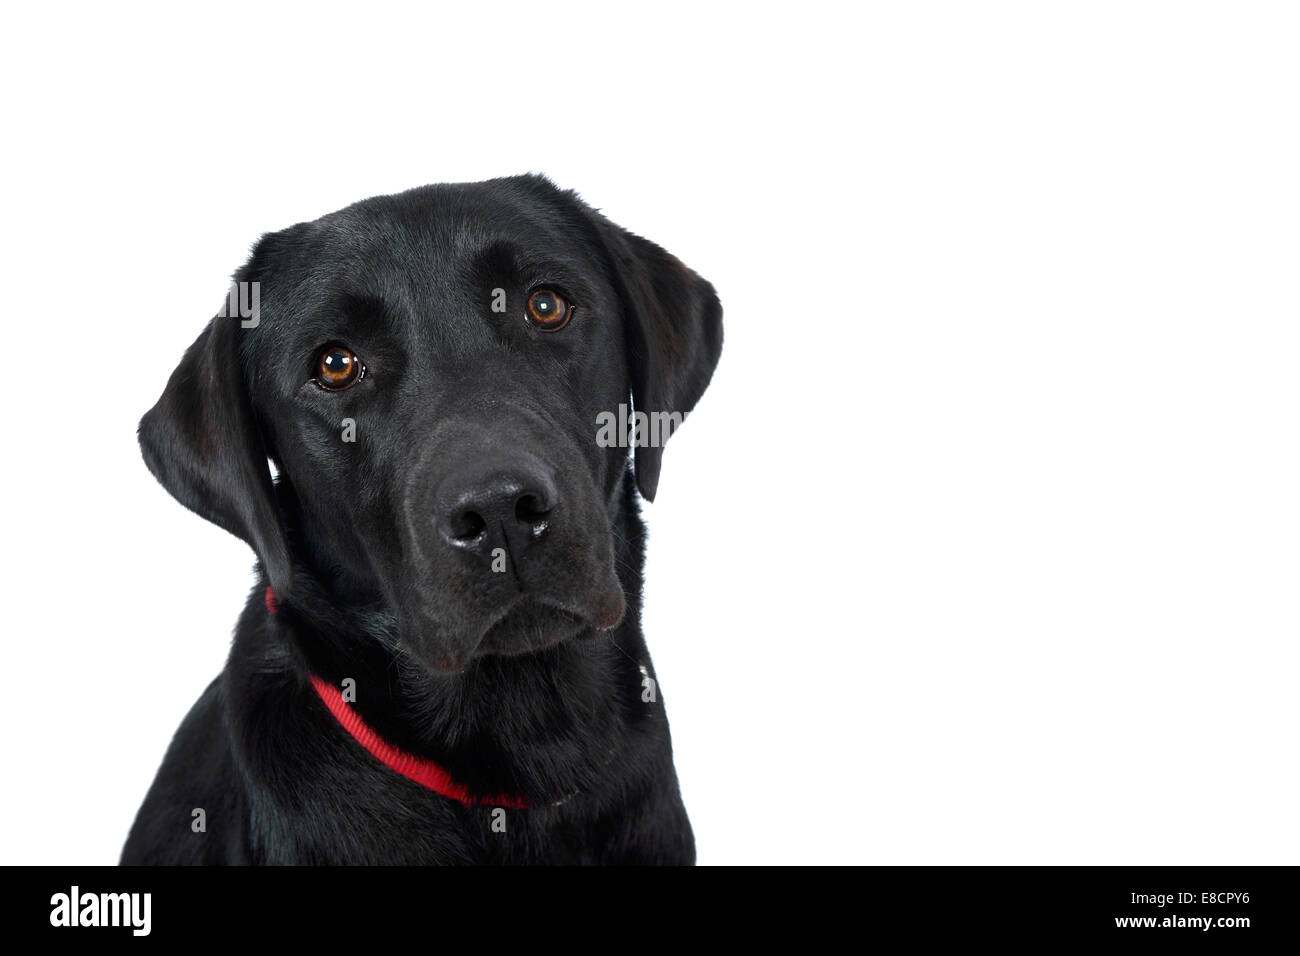 Attentive black labrador retriever dog looking at camera cut out isolated on white background Stock Photo